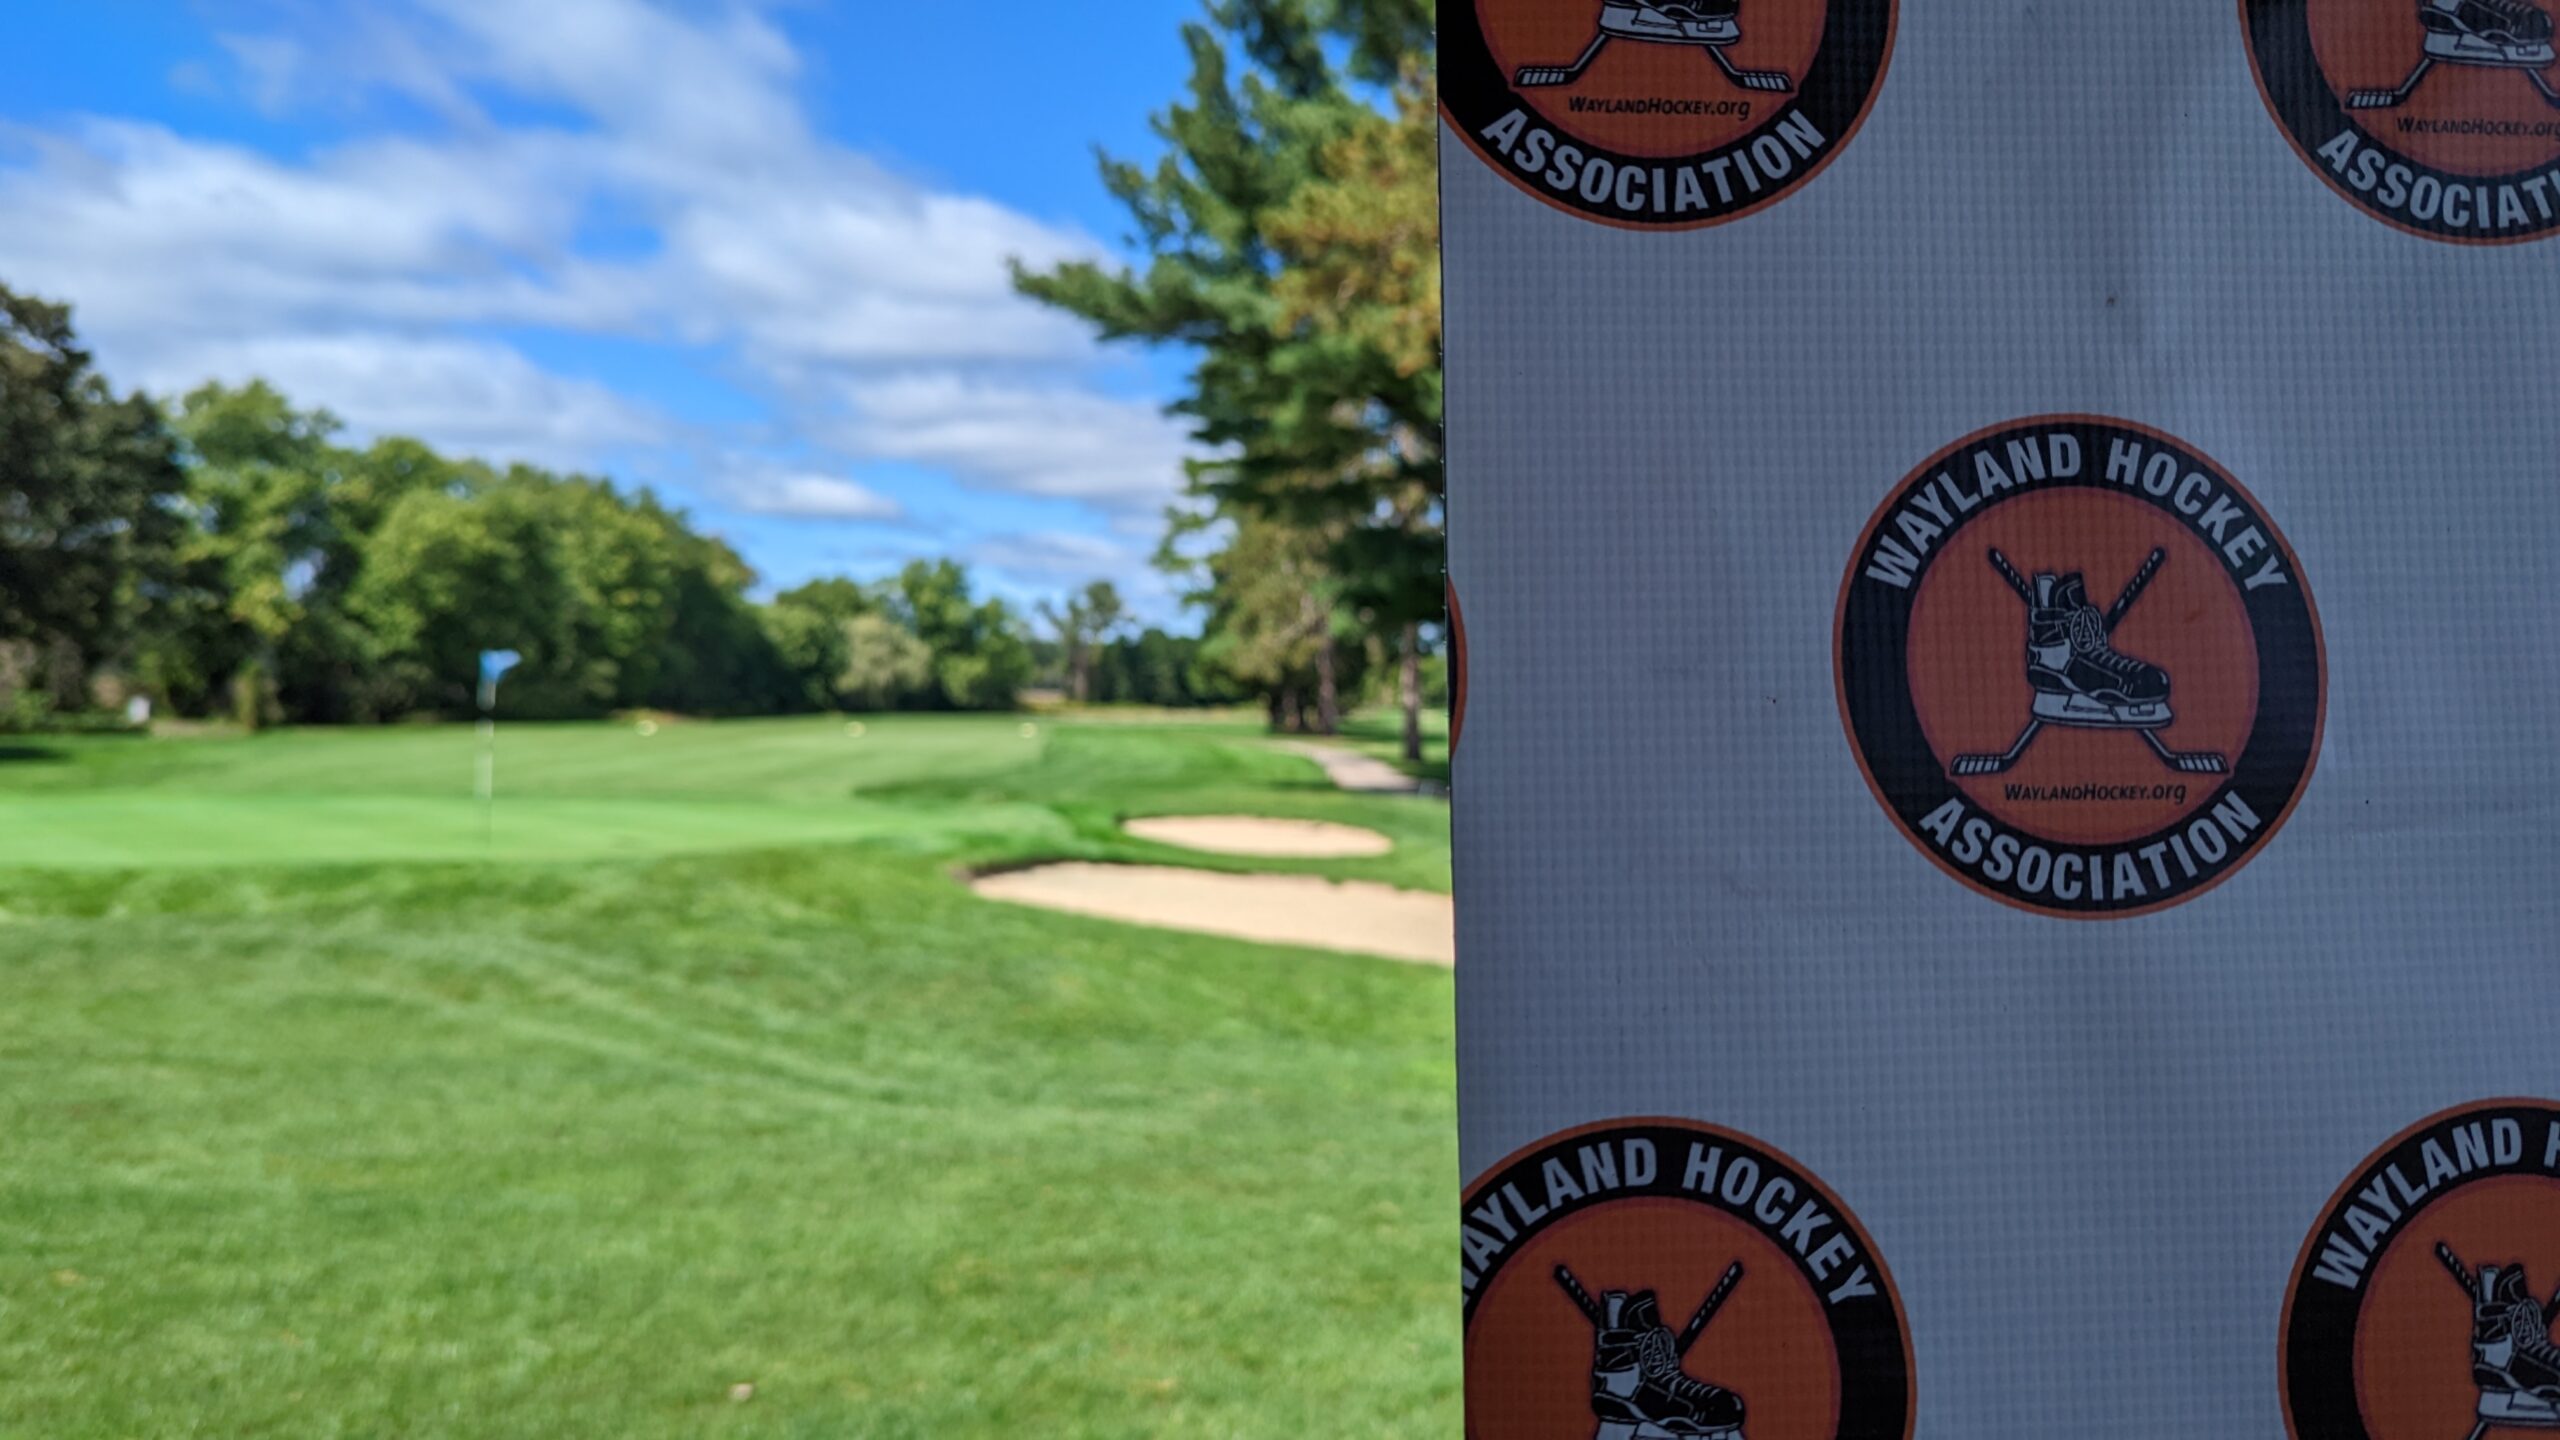 Scenes from the Wayland Hockey Association 2022 Annual Golf Tournament